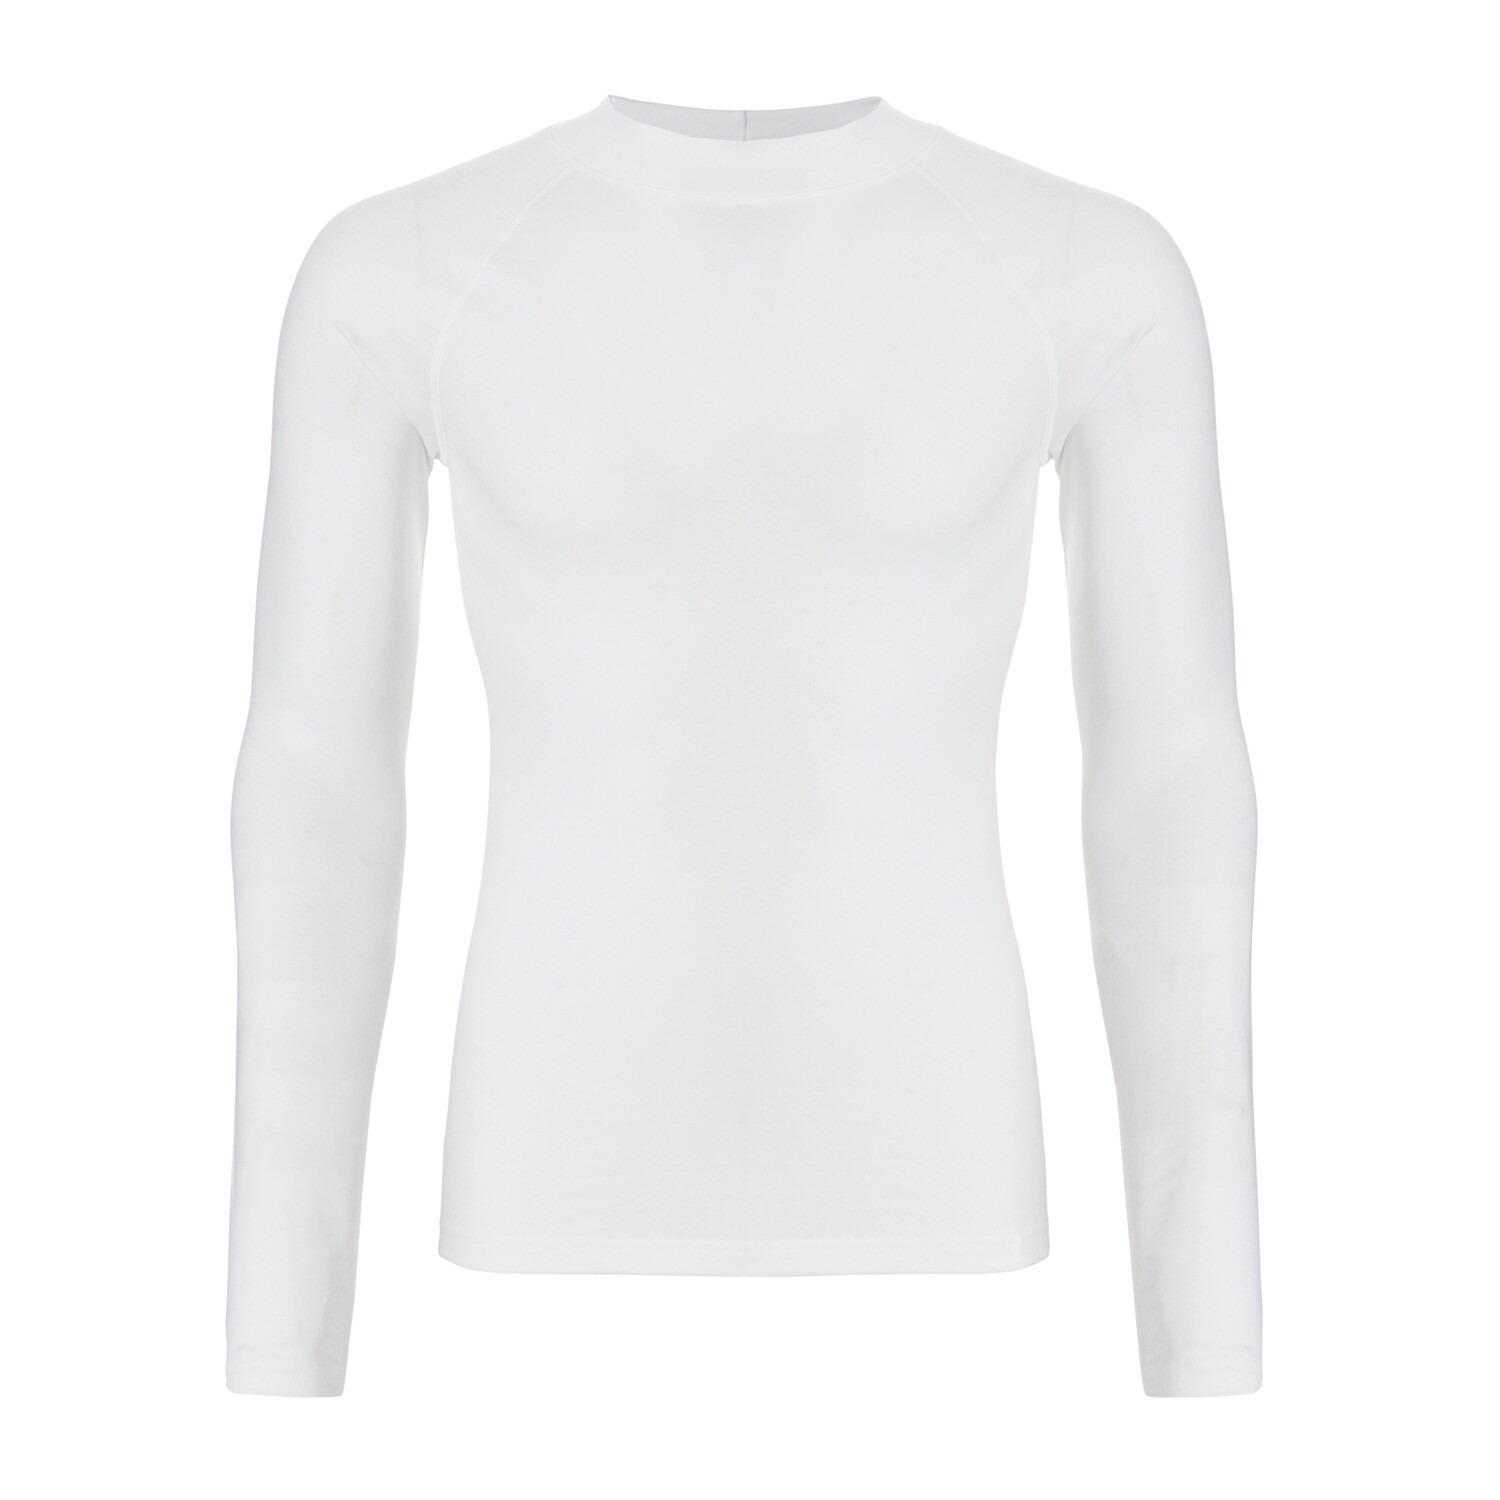 Ten Cate Thermo men long sleeve